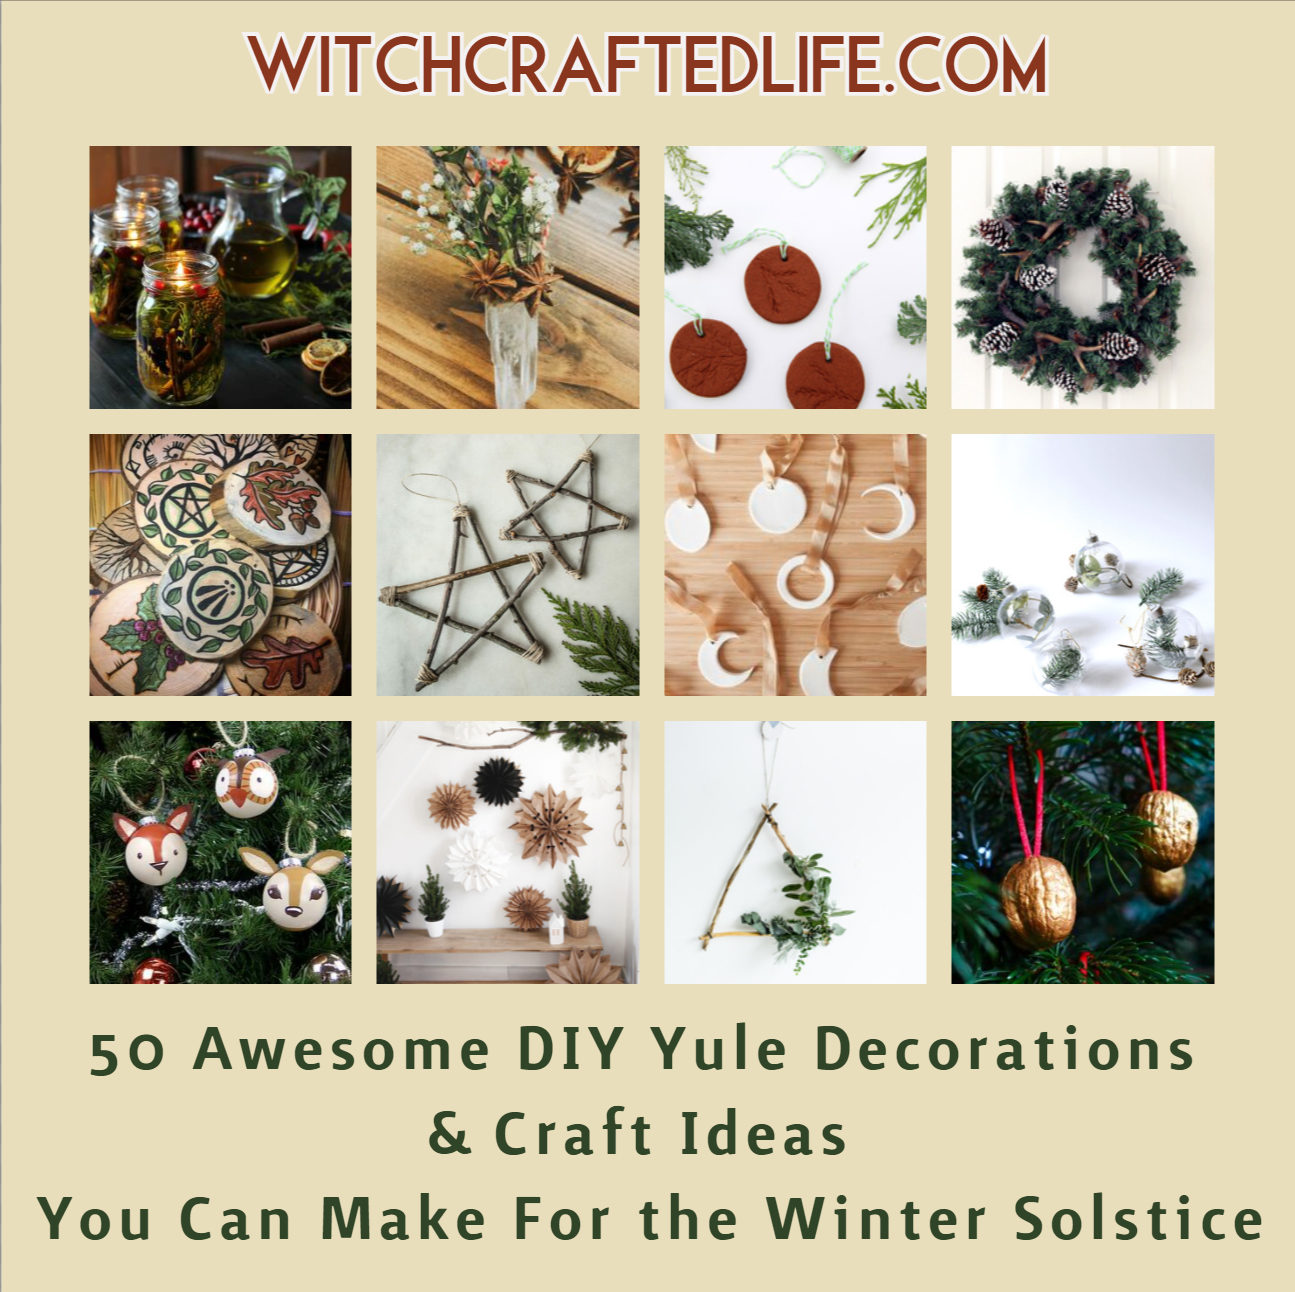 https://witchcraftedlife.com/wp-content/uploads/2020/12/50-Awesome-DIY-Yule-Decorations-and-Craft-Ideas-You-Can-Make-For-the-Winter-Solstice-1-1024x1022@2x.jpg